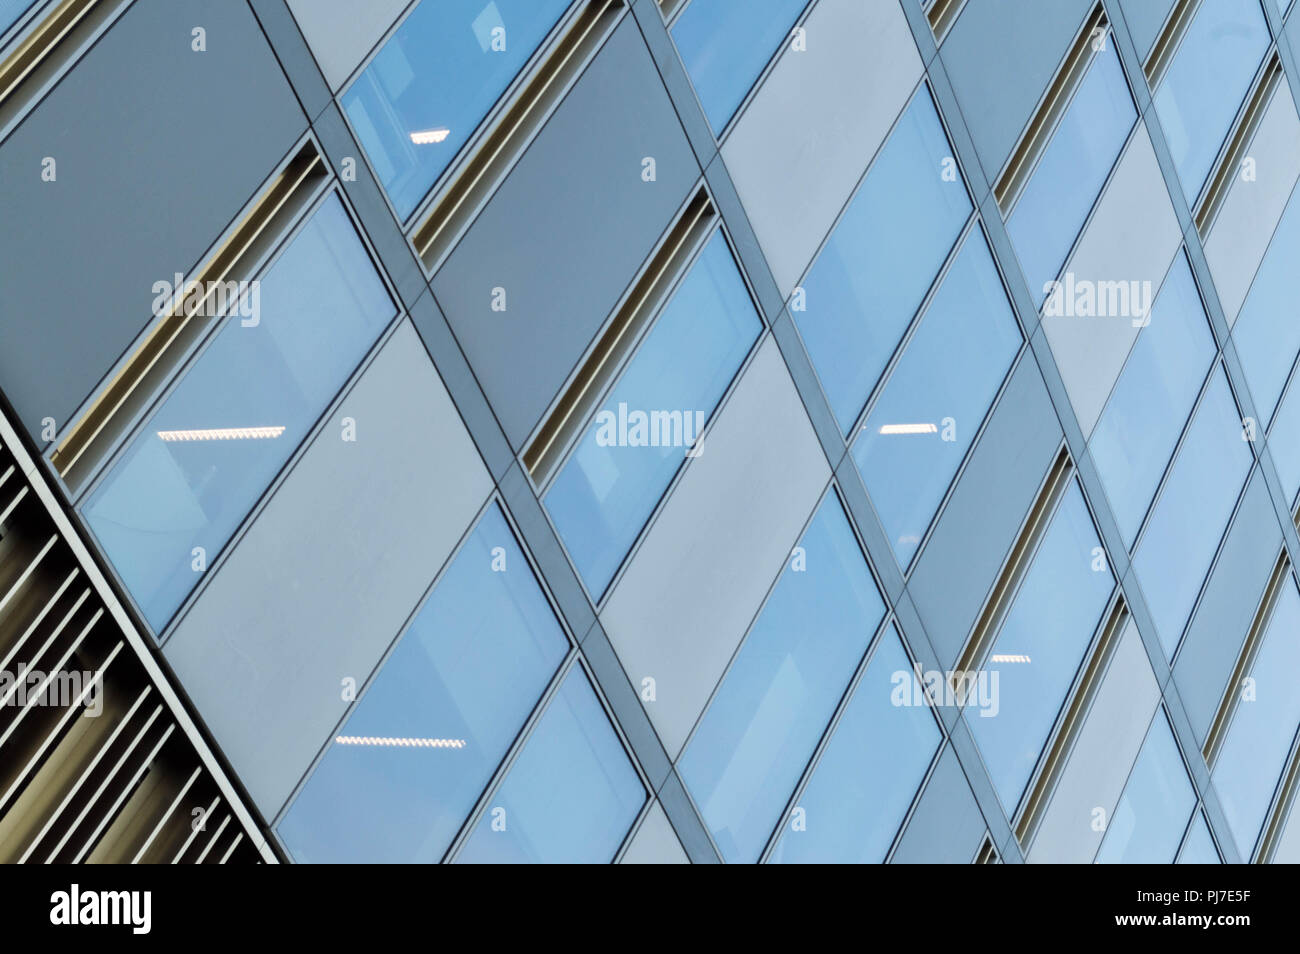 Business architecture building with glass windows and dynamic lines Stock Photo